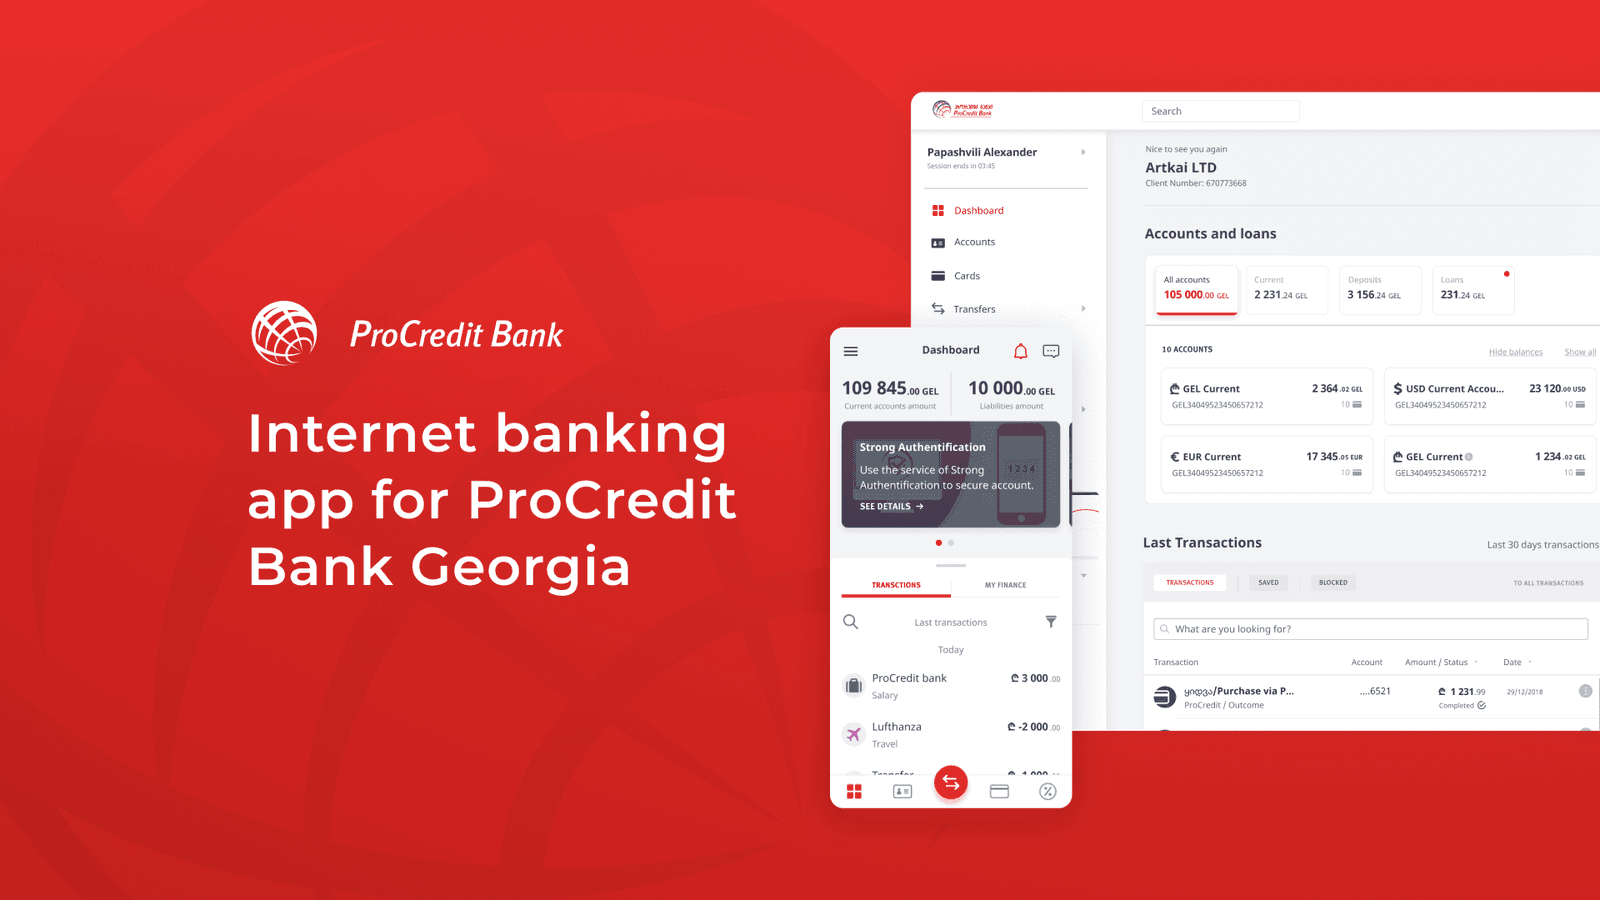 Upgraded internet banking experience for ProCredit bank Georgia by Artkai